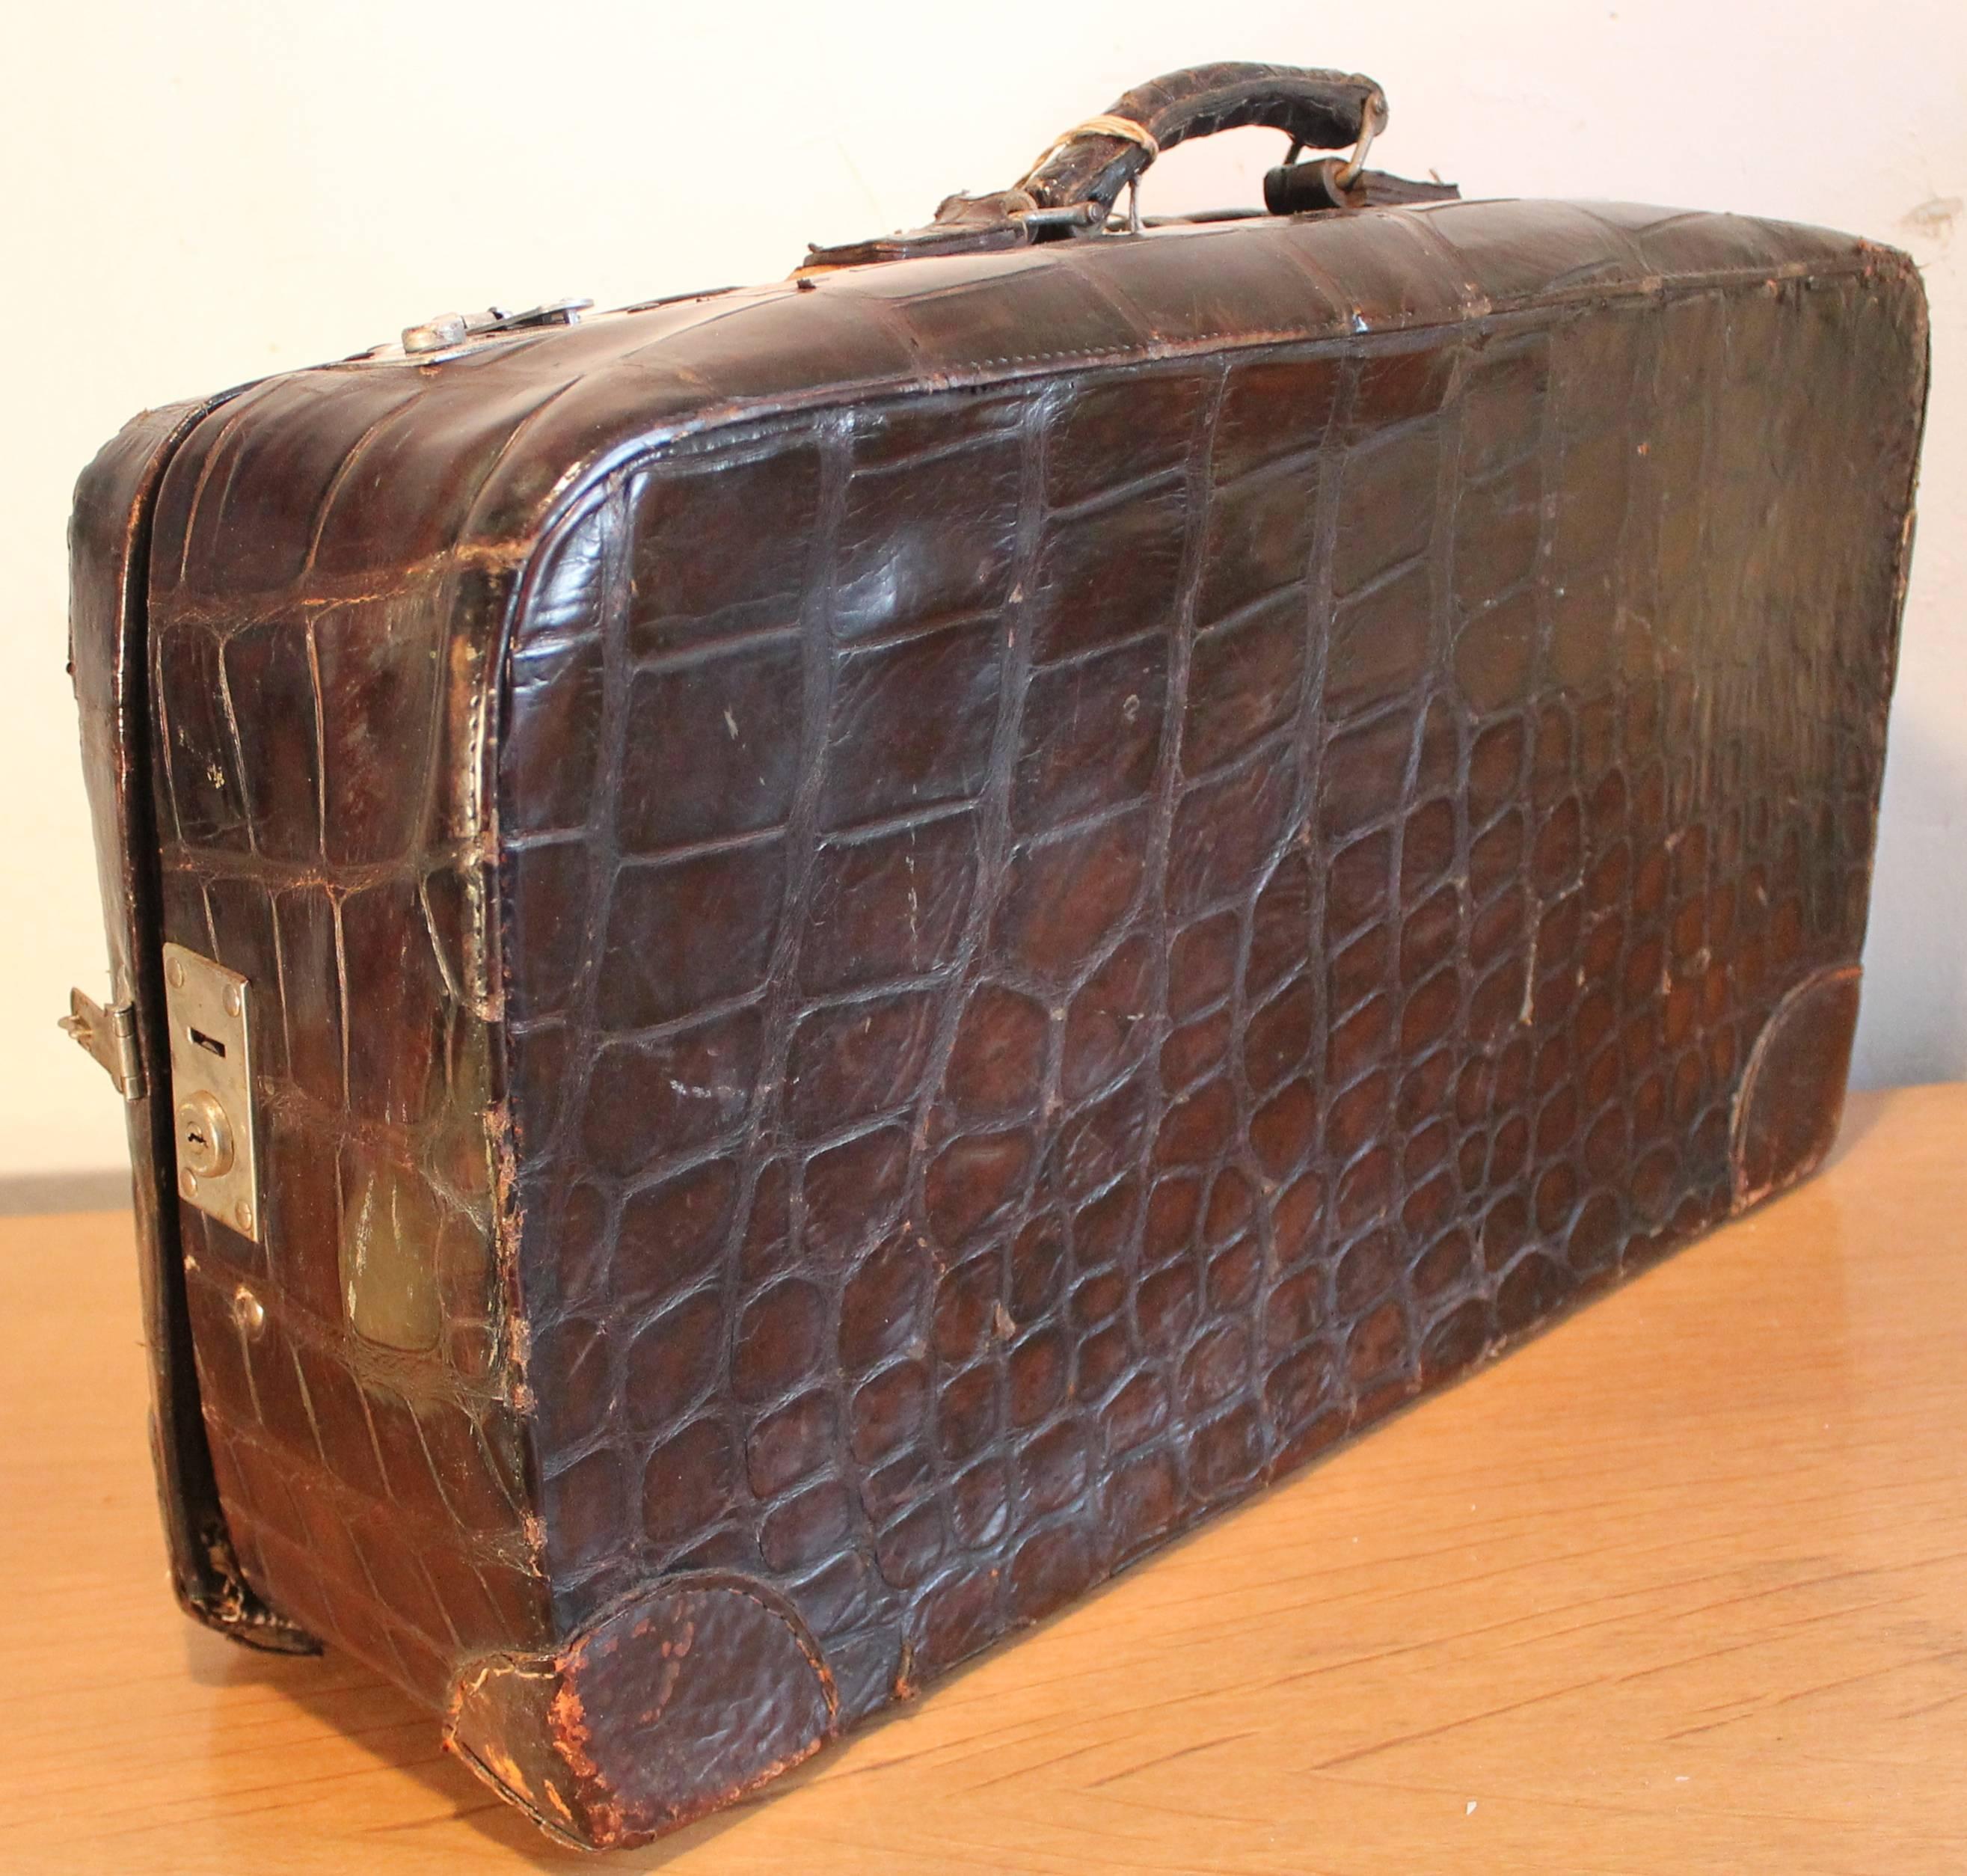 A beautiful high quality deluxe brown/black suitcase, much travelled by the acclaimed and famous Polish/American opera and film star Jan Kiepura. Note in the last photo the impression of the J K initials.